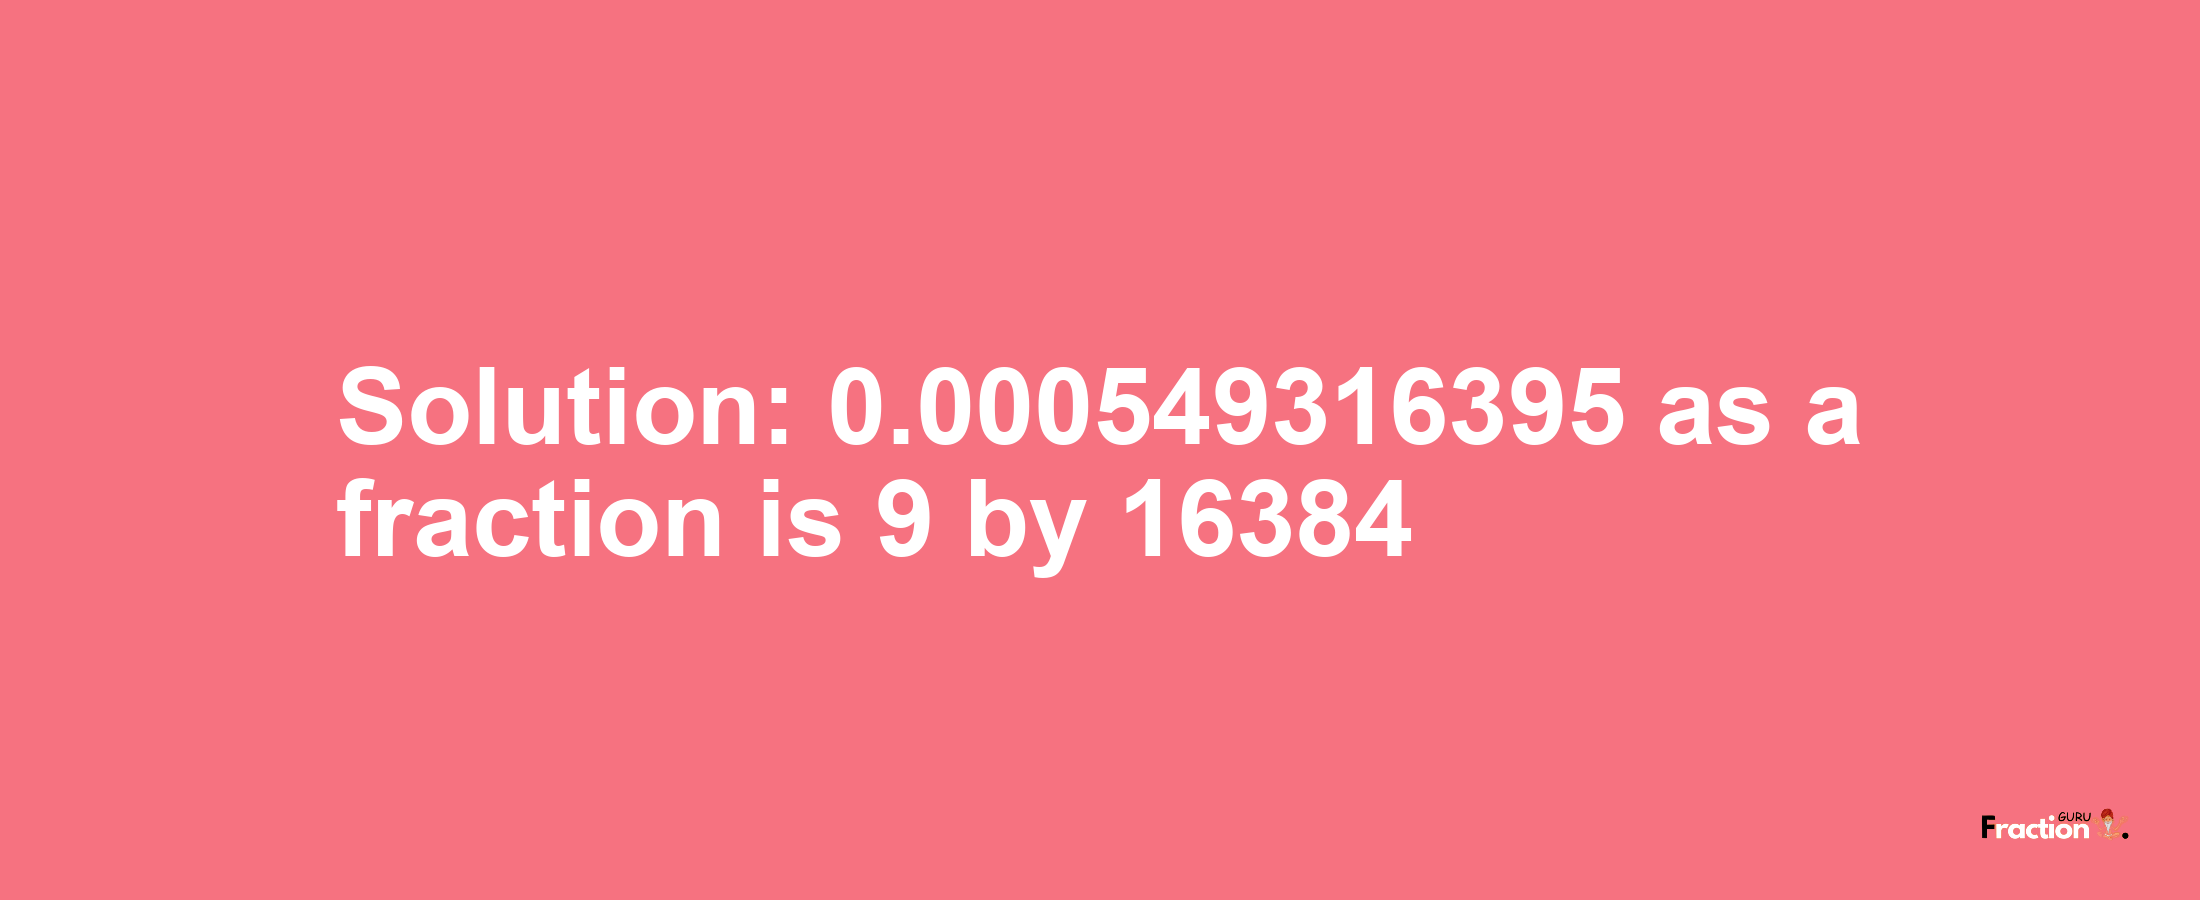 Solution:0.000549316395 as a fraction is 9/16384